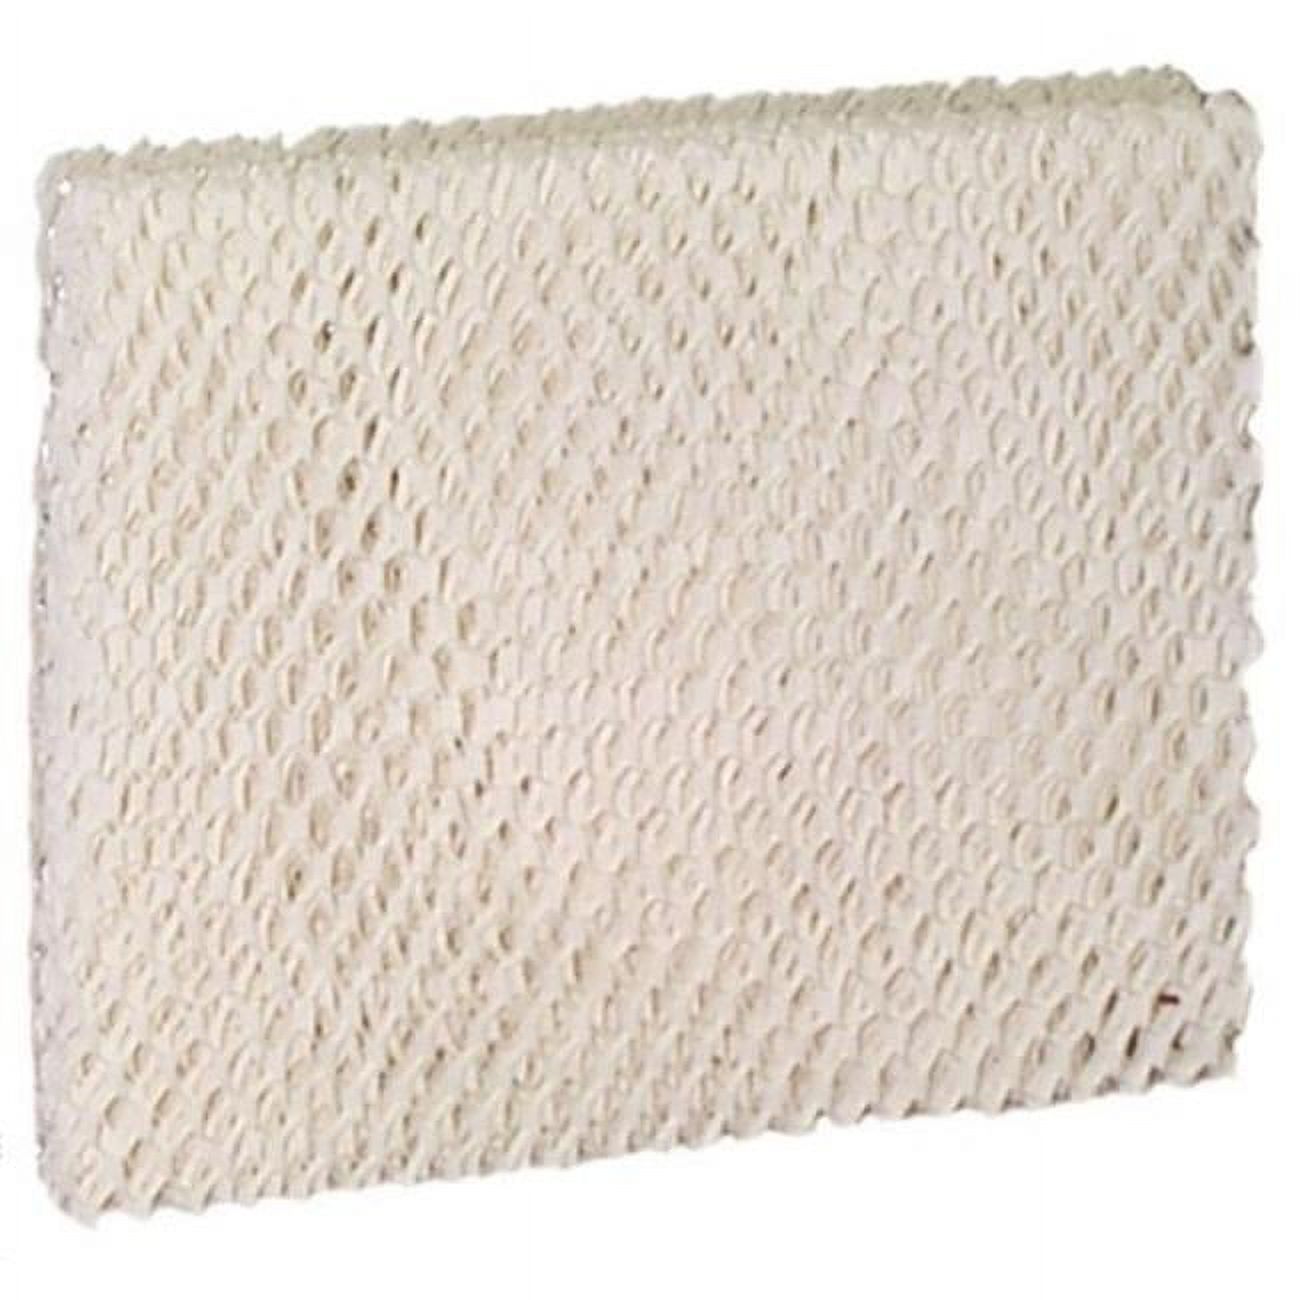 Filters-NOW UFHWF23CS Holmes HWF23CS Humidifier Filter 2 Pack - image 1 of 1